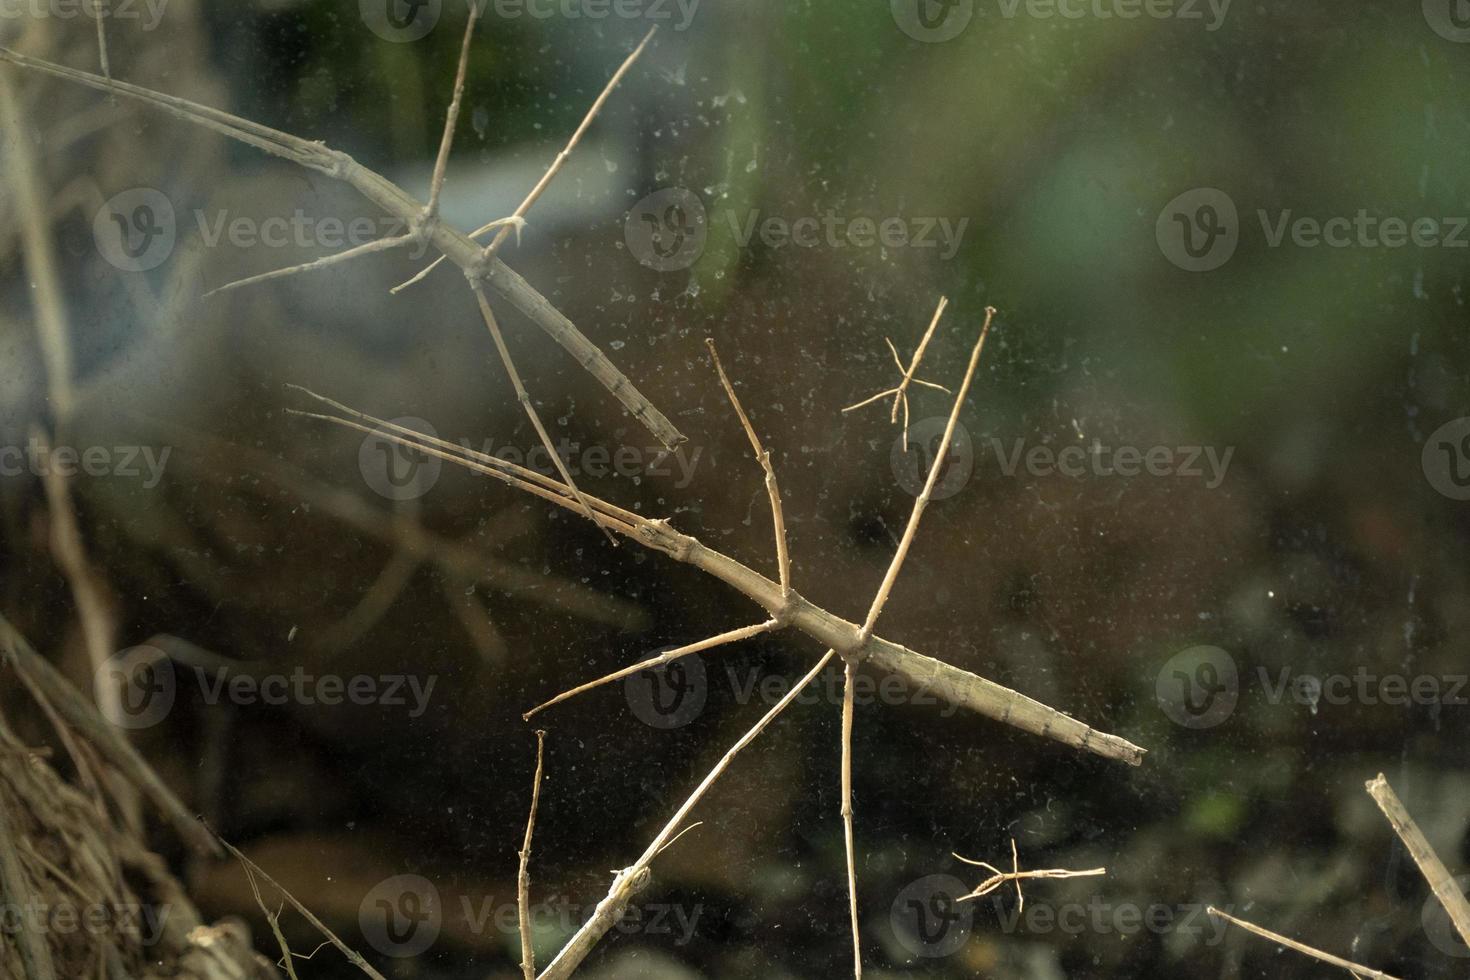 Annan stick insect close up photo